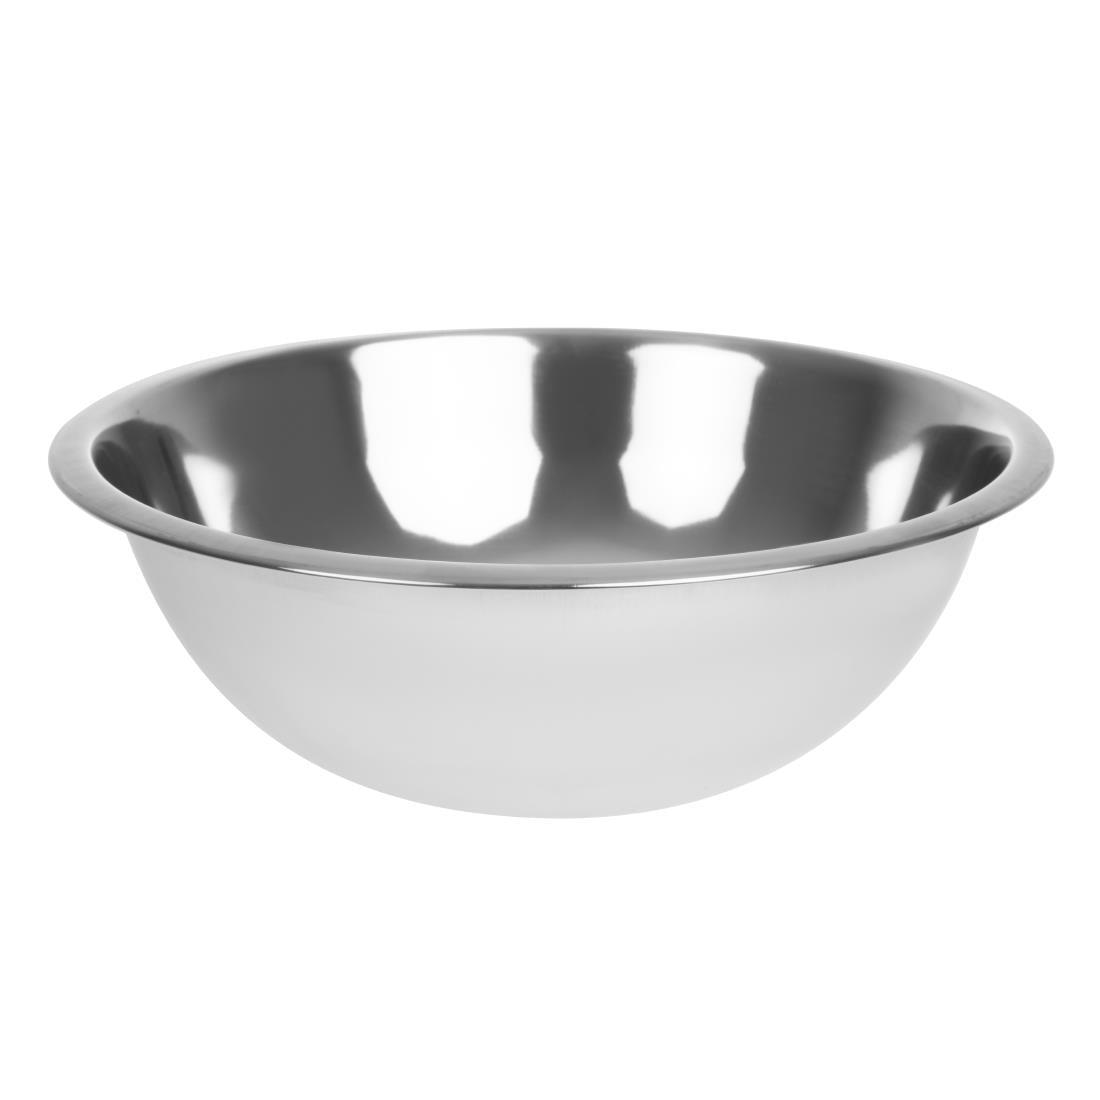 GC135 Vogue Stainless Steel Mixing Bowl 2.2Ltr JD Catering Equipment Solutions Ltd